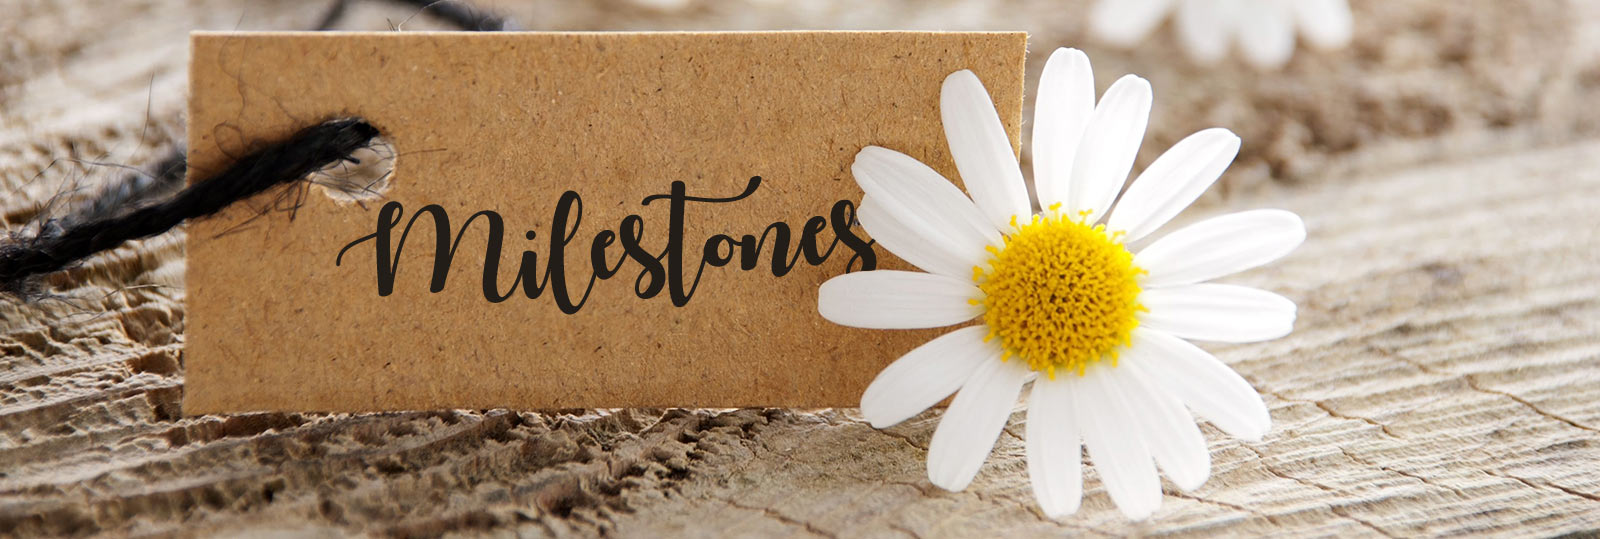 Milestone Gift Delivery – Chicago Floral Designs